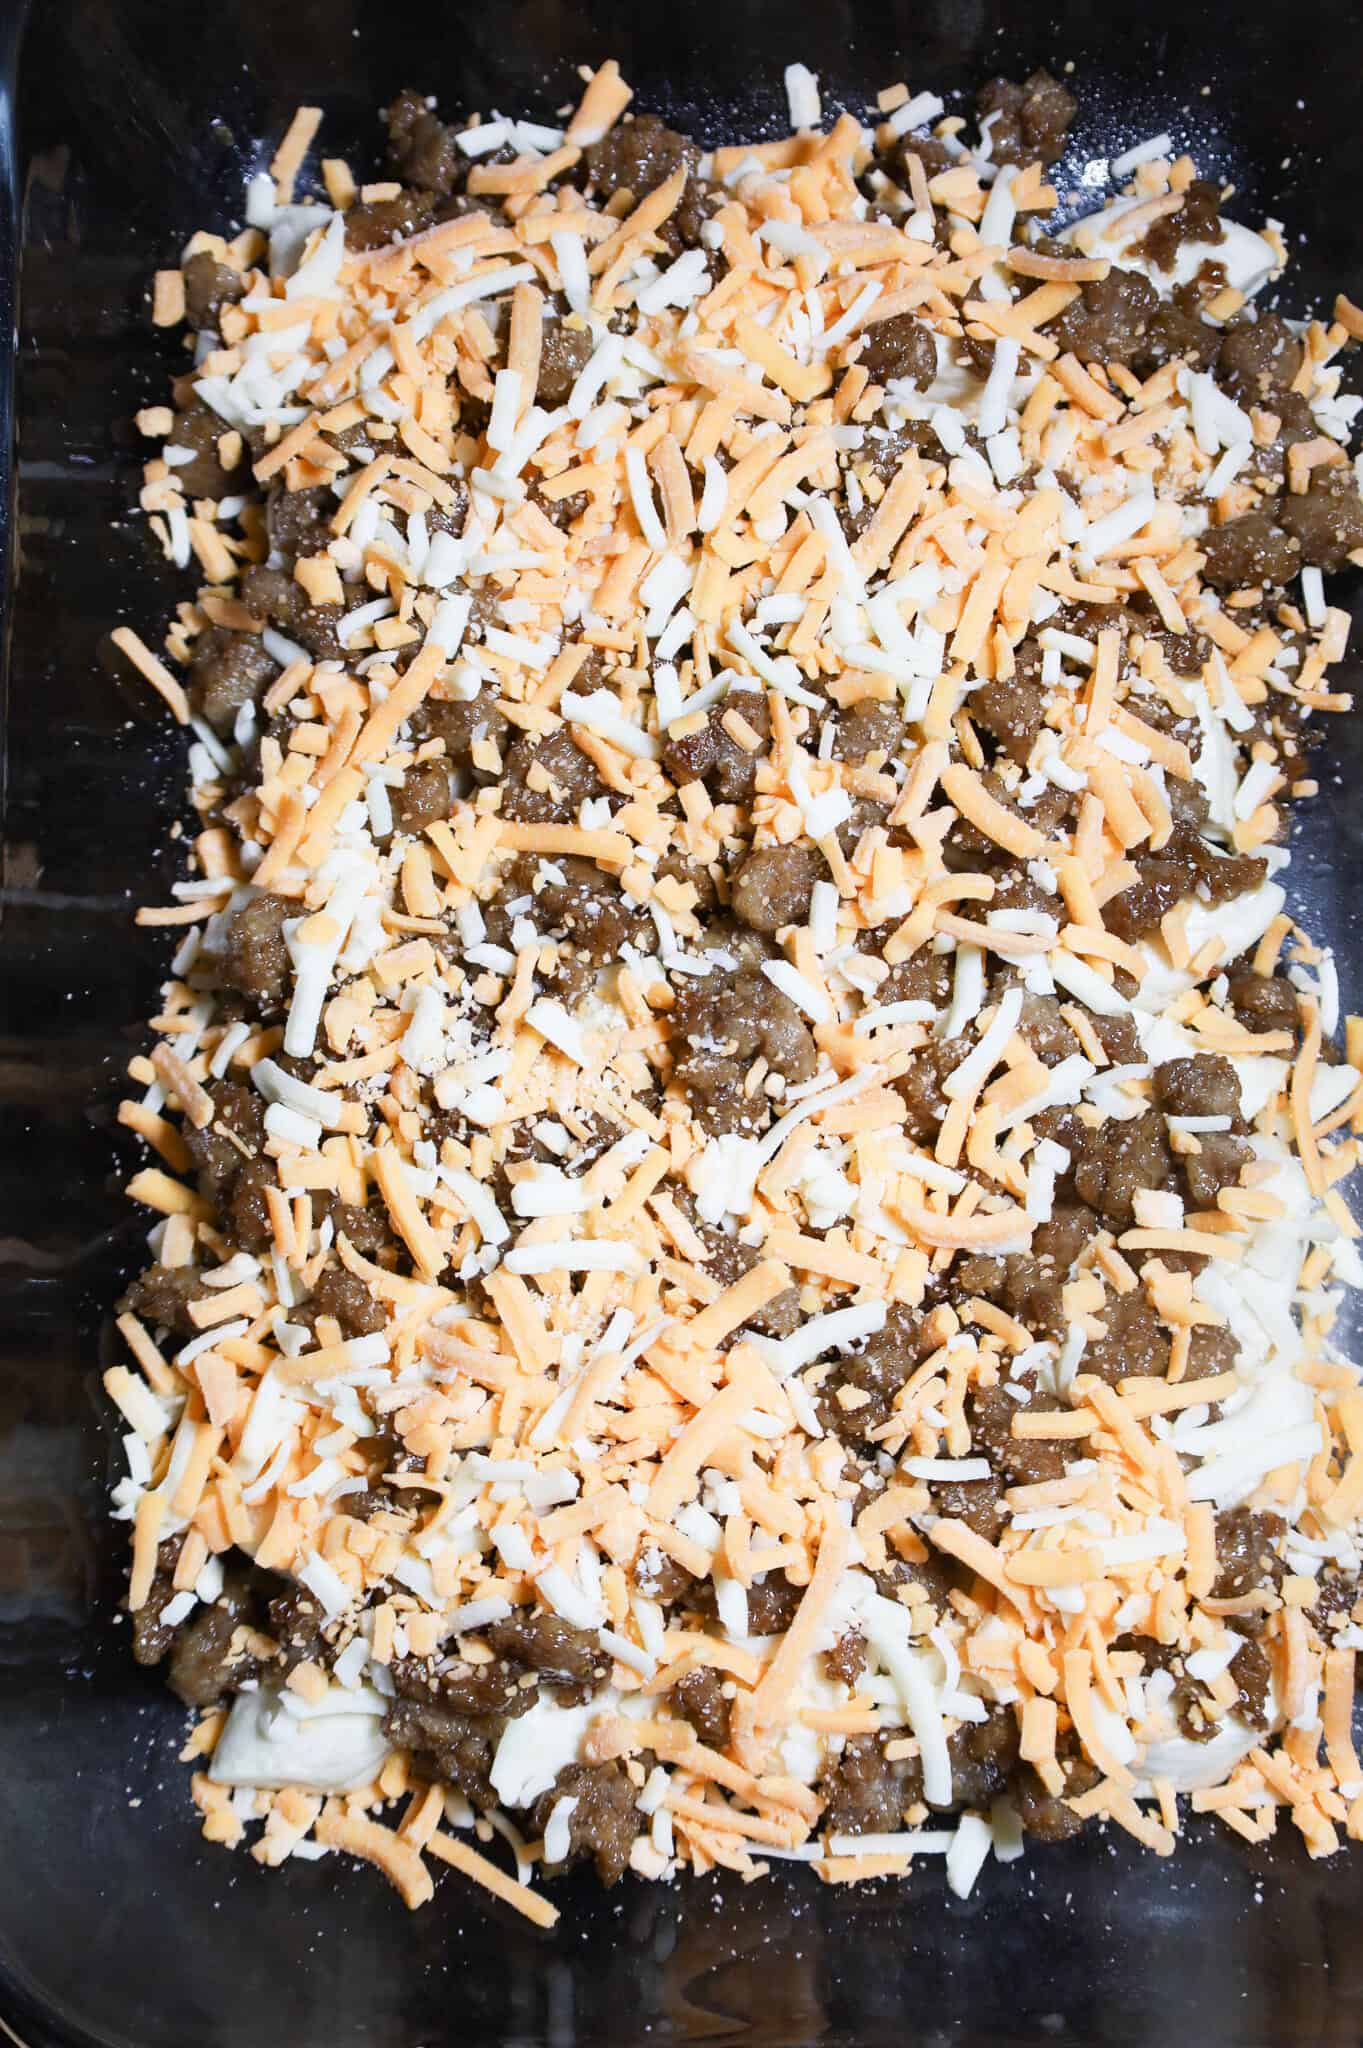 shredded cheese and sausage crumble on top of biscuit pieces in a baking dish